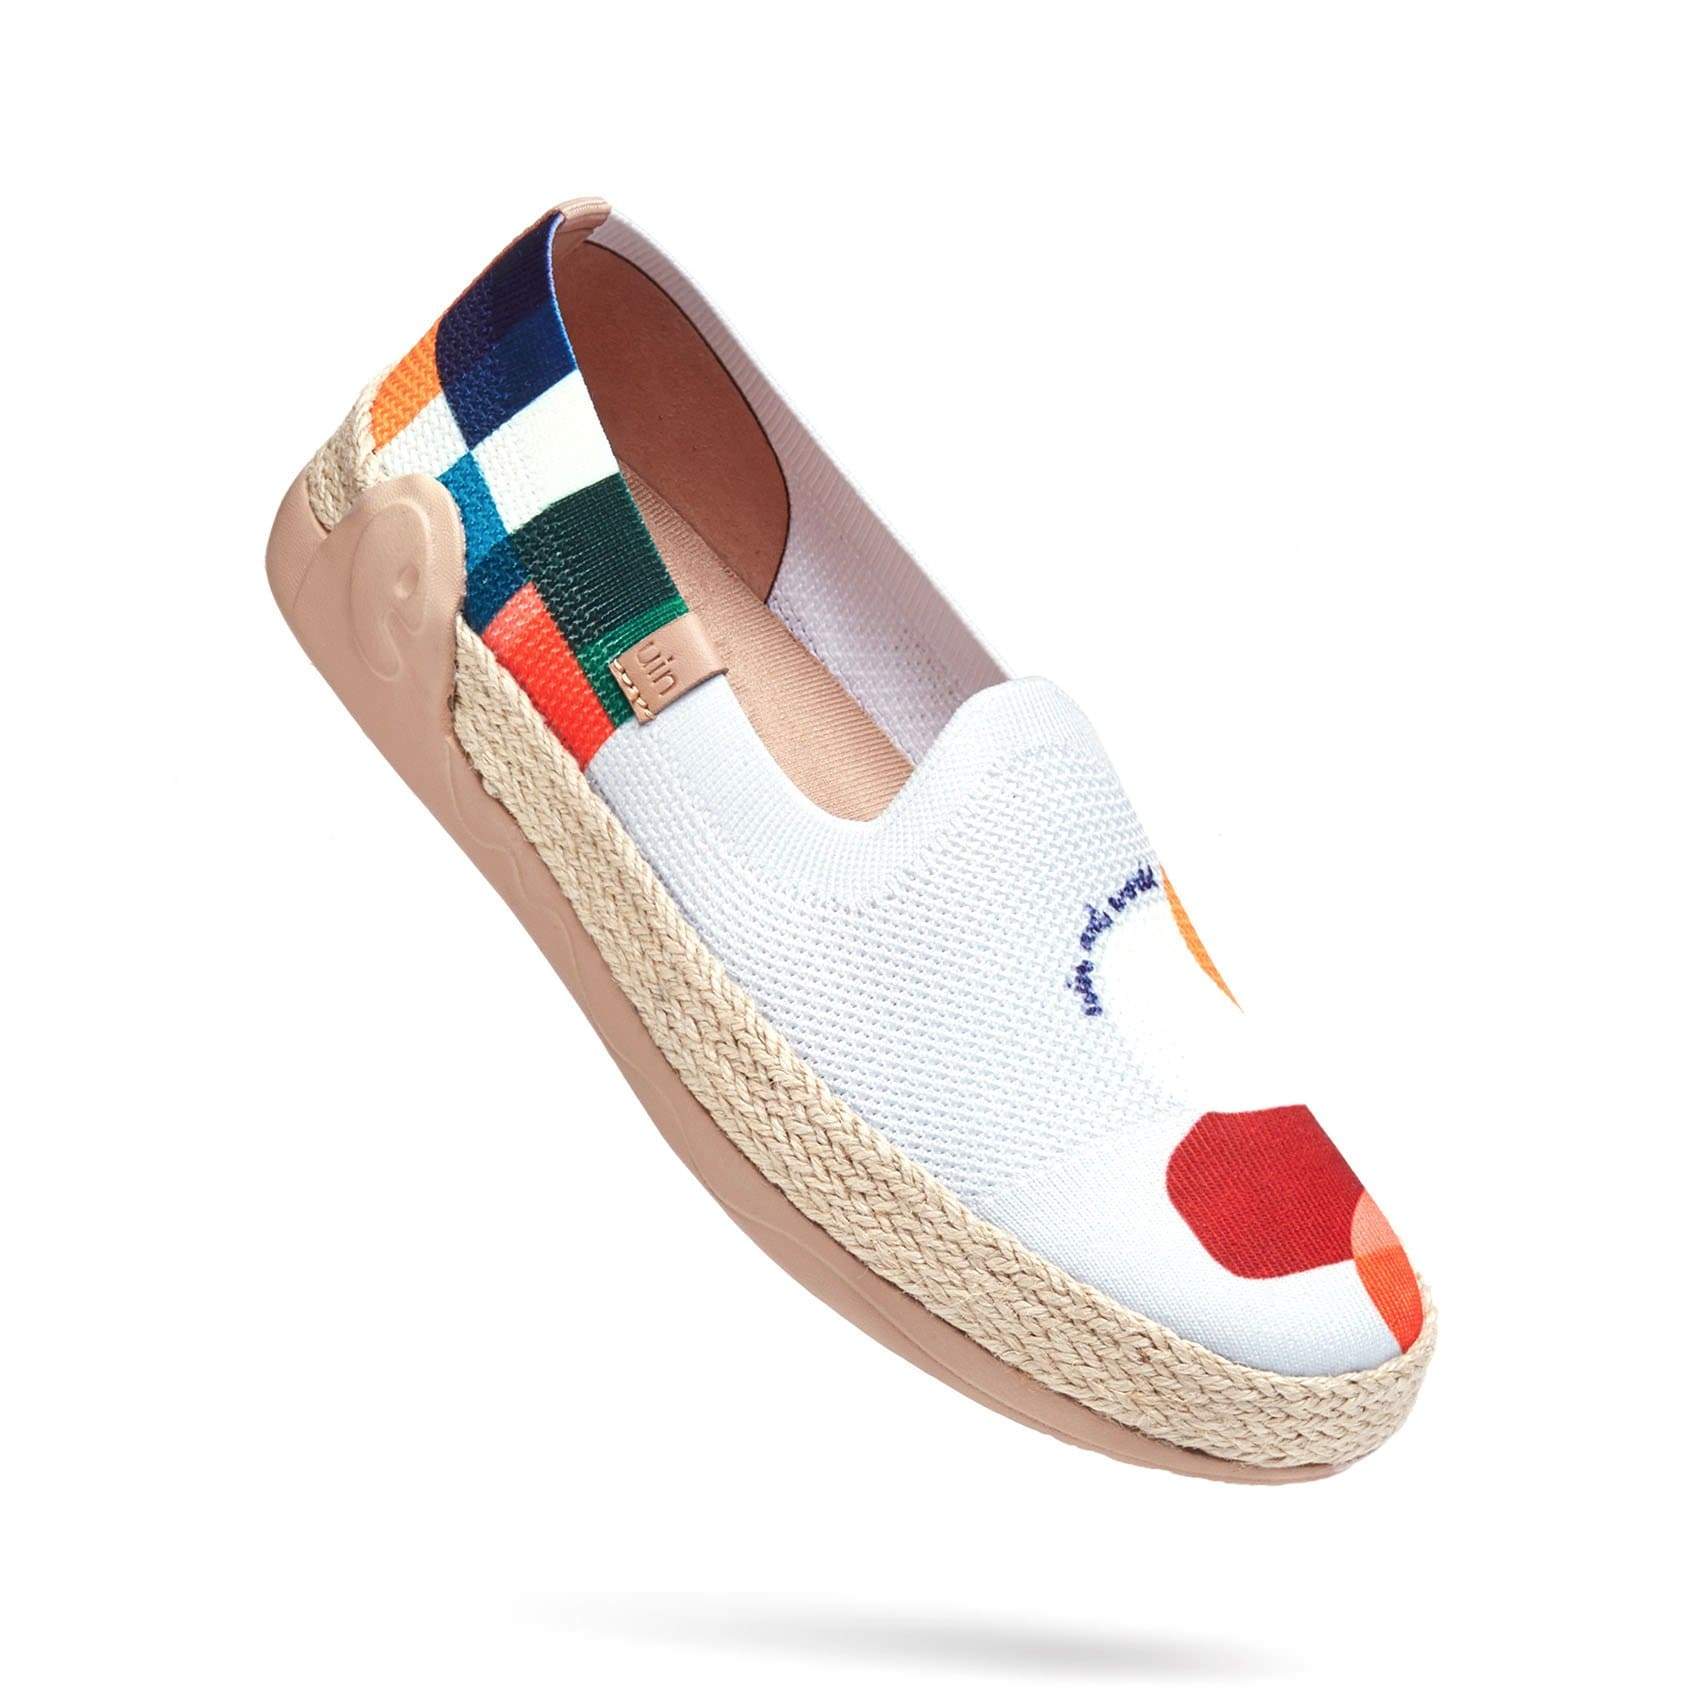 UIN Footwear Women Hold that Color Marbella Canvas loafers